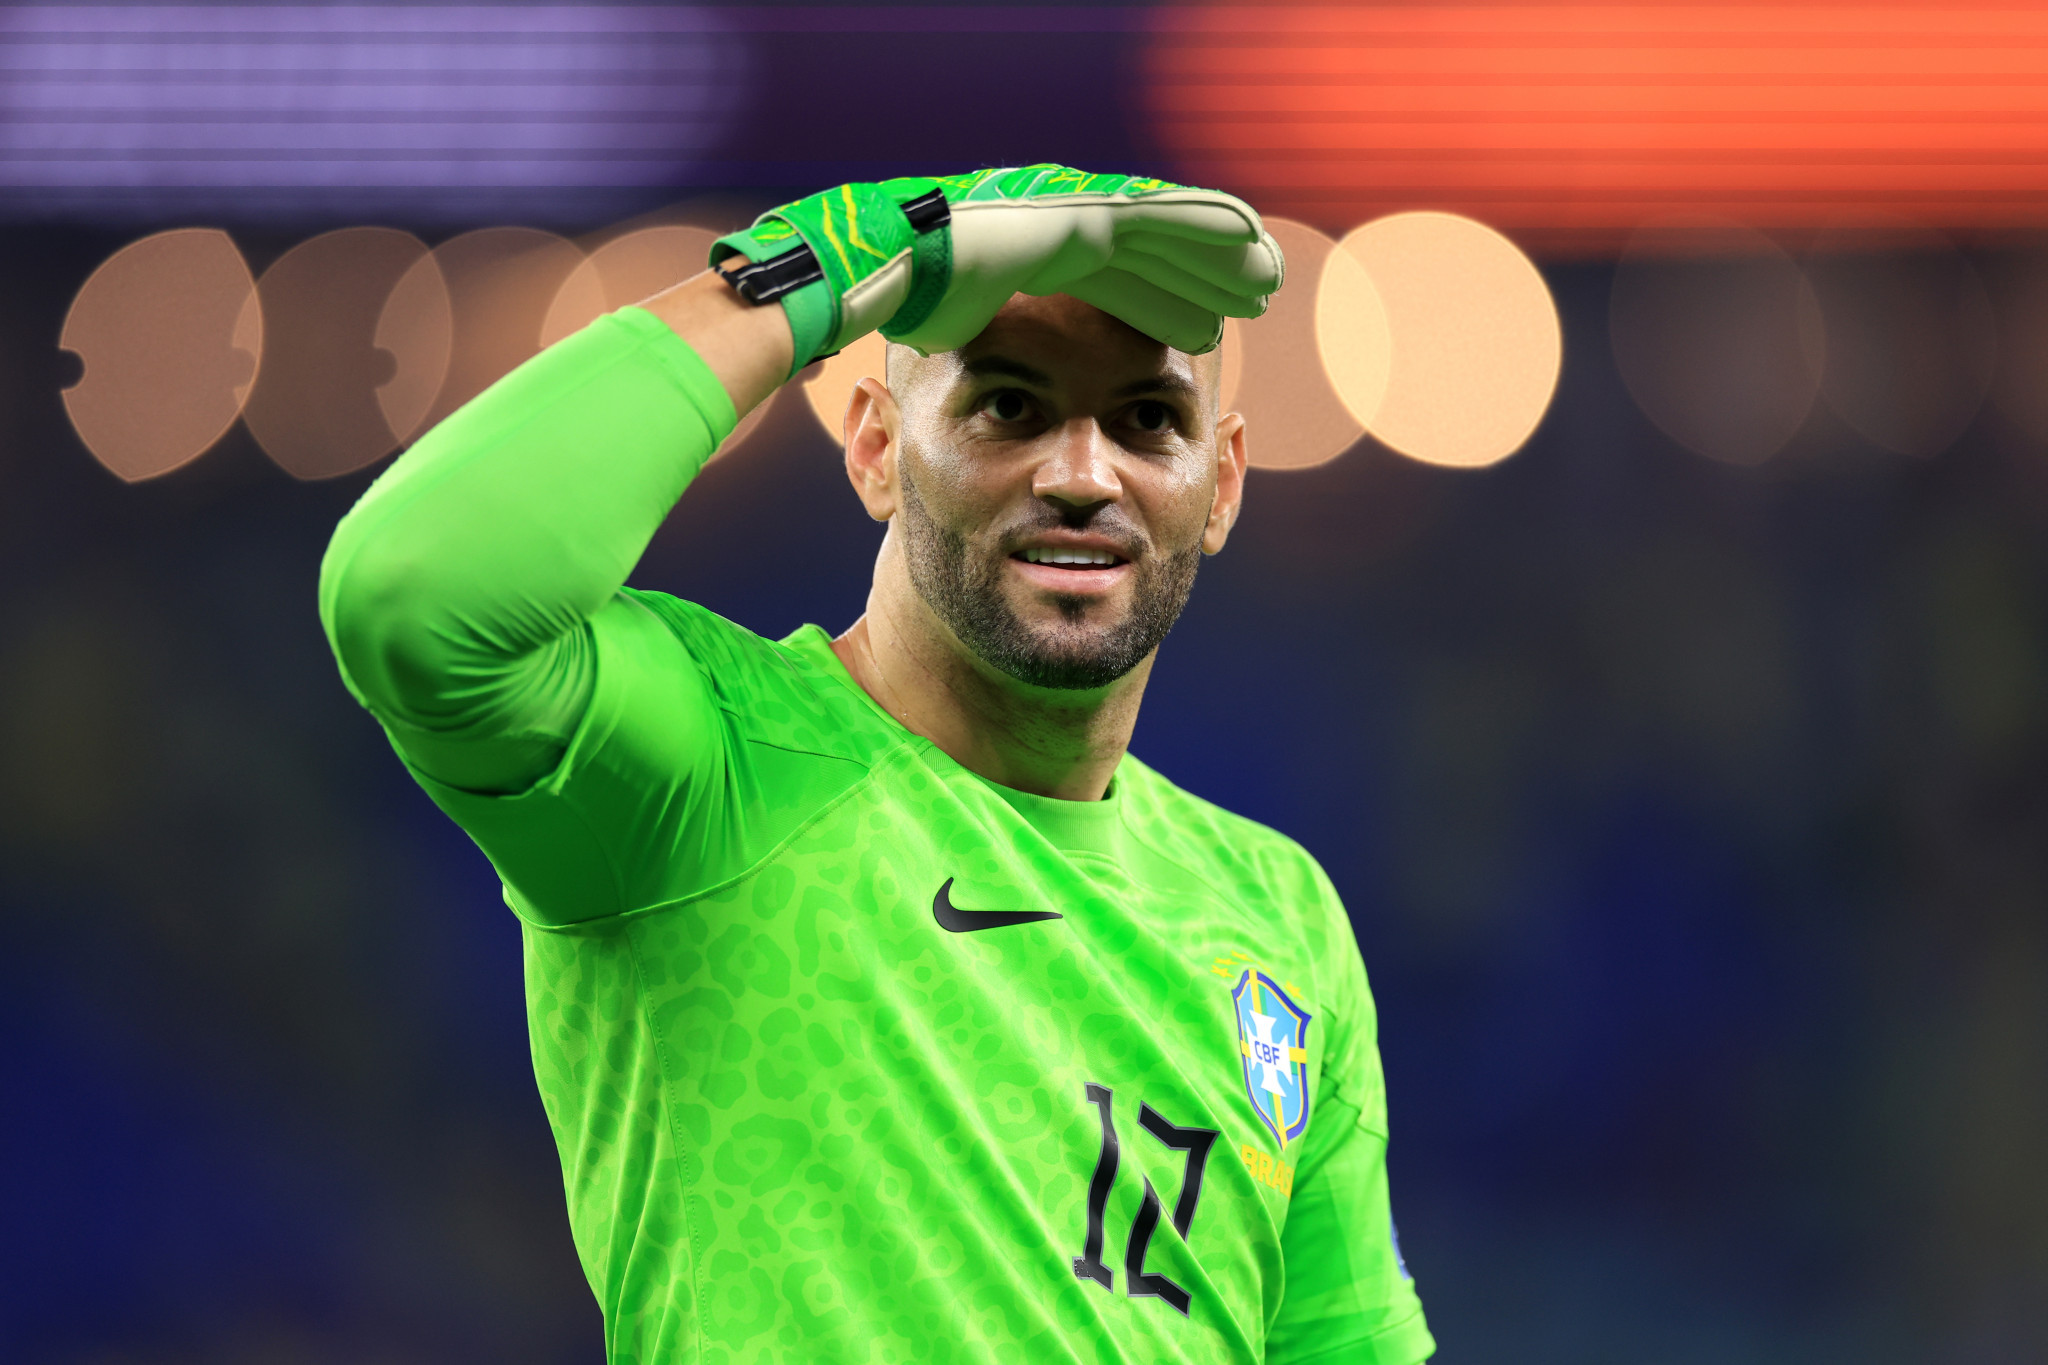 Brazil's dominance was such that there was even time for third-choice goalkeeper Weverton to be brought on, meaning all 26 players in the squad have now played ©Getty Images